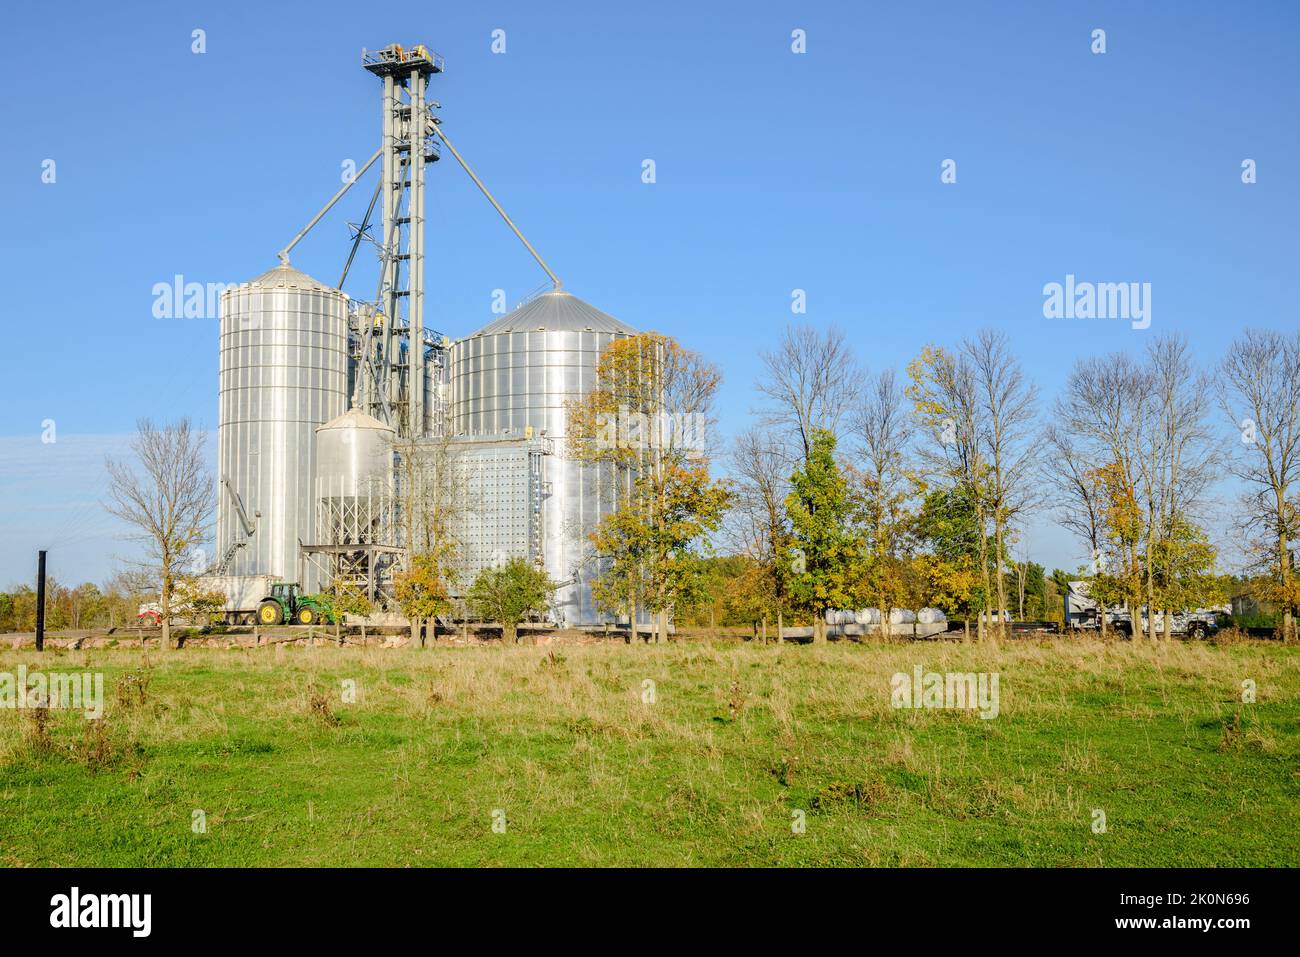 View of a grain elevator with large steel storage bins in the countryside under clear sky at sunset Stock Photo